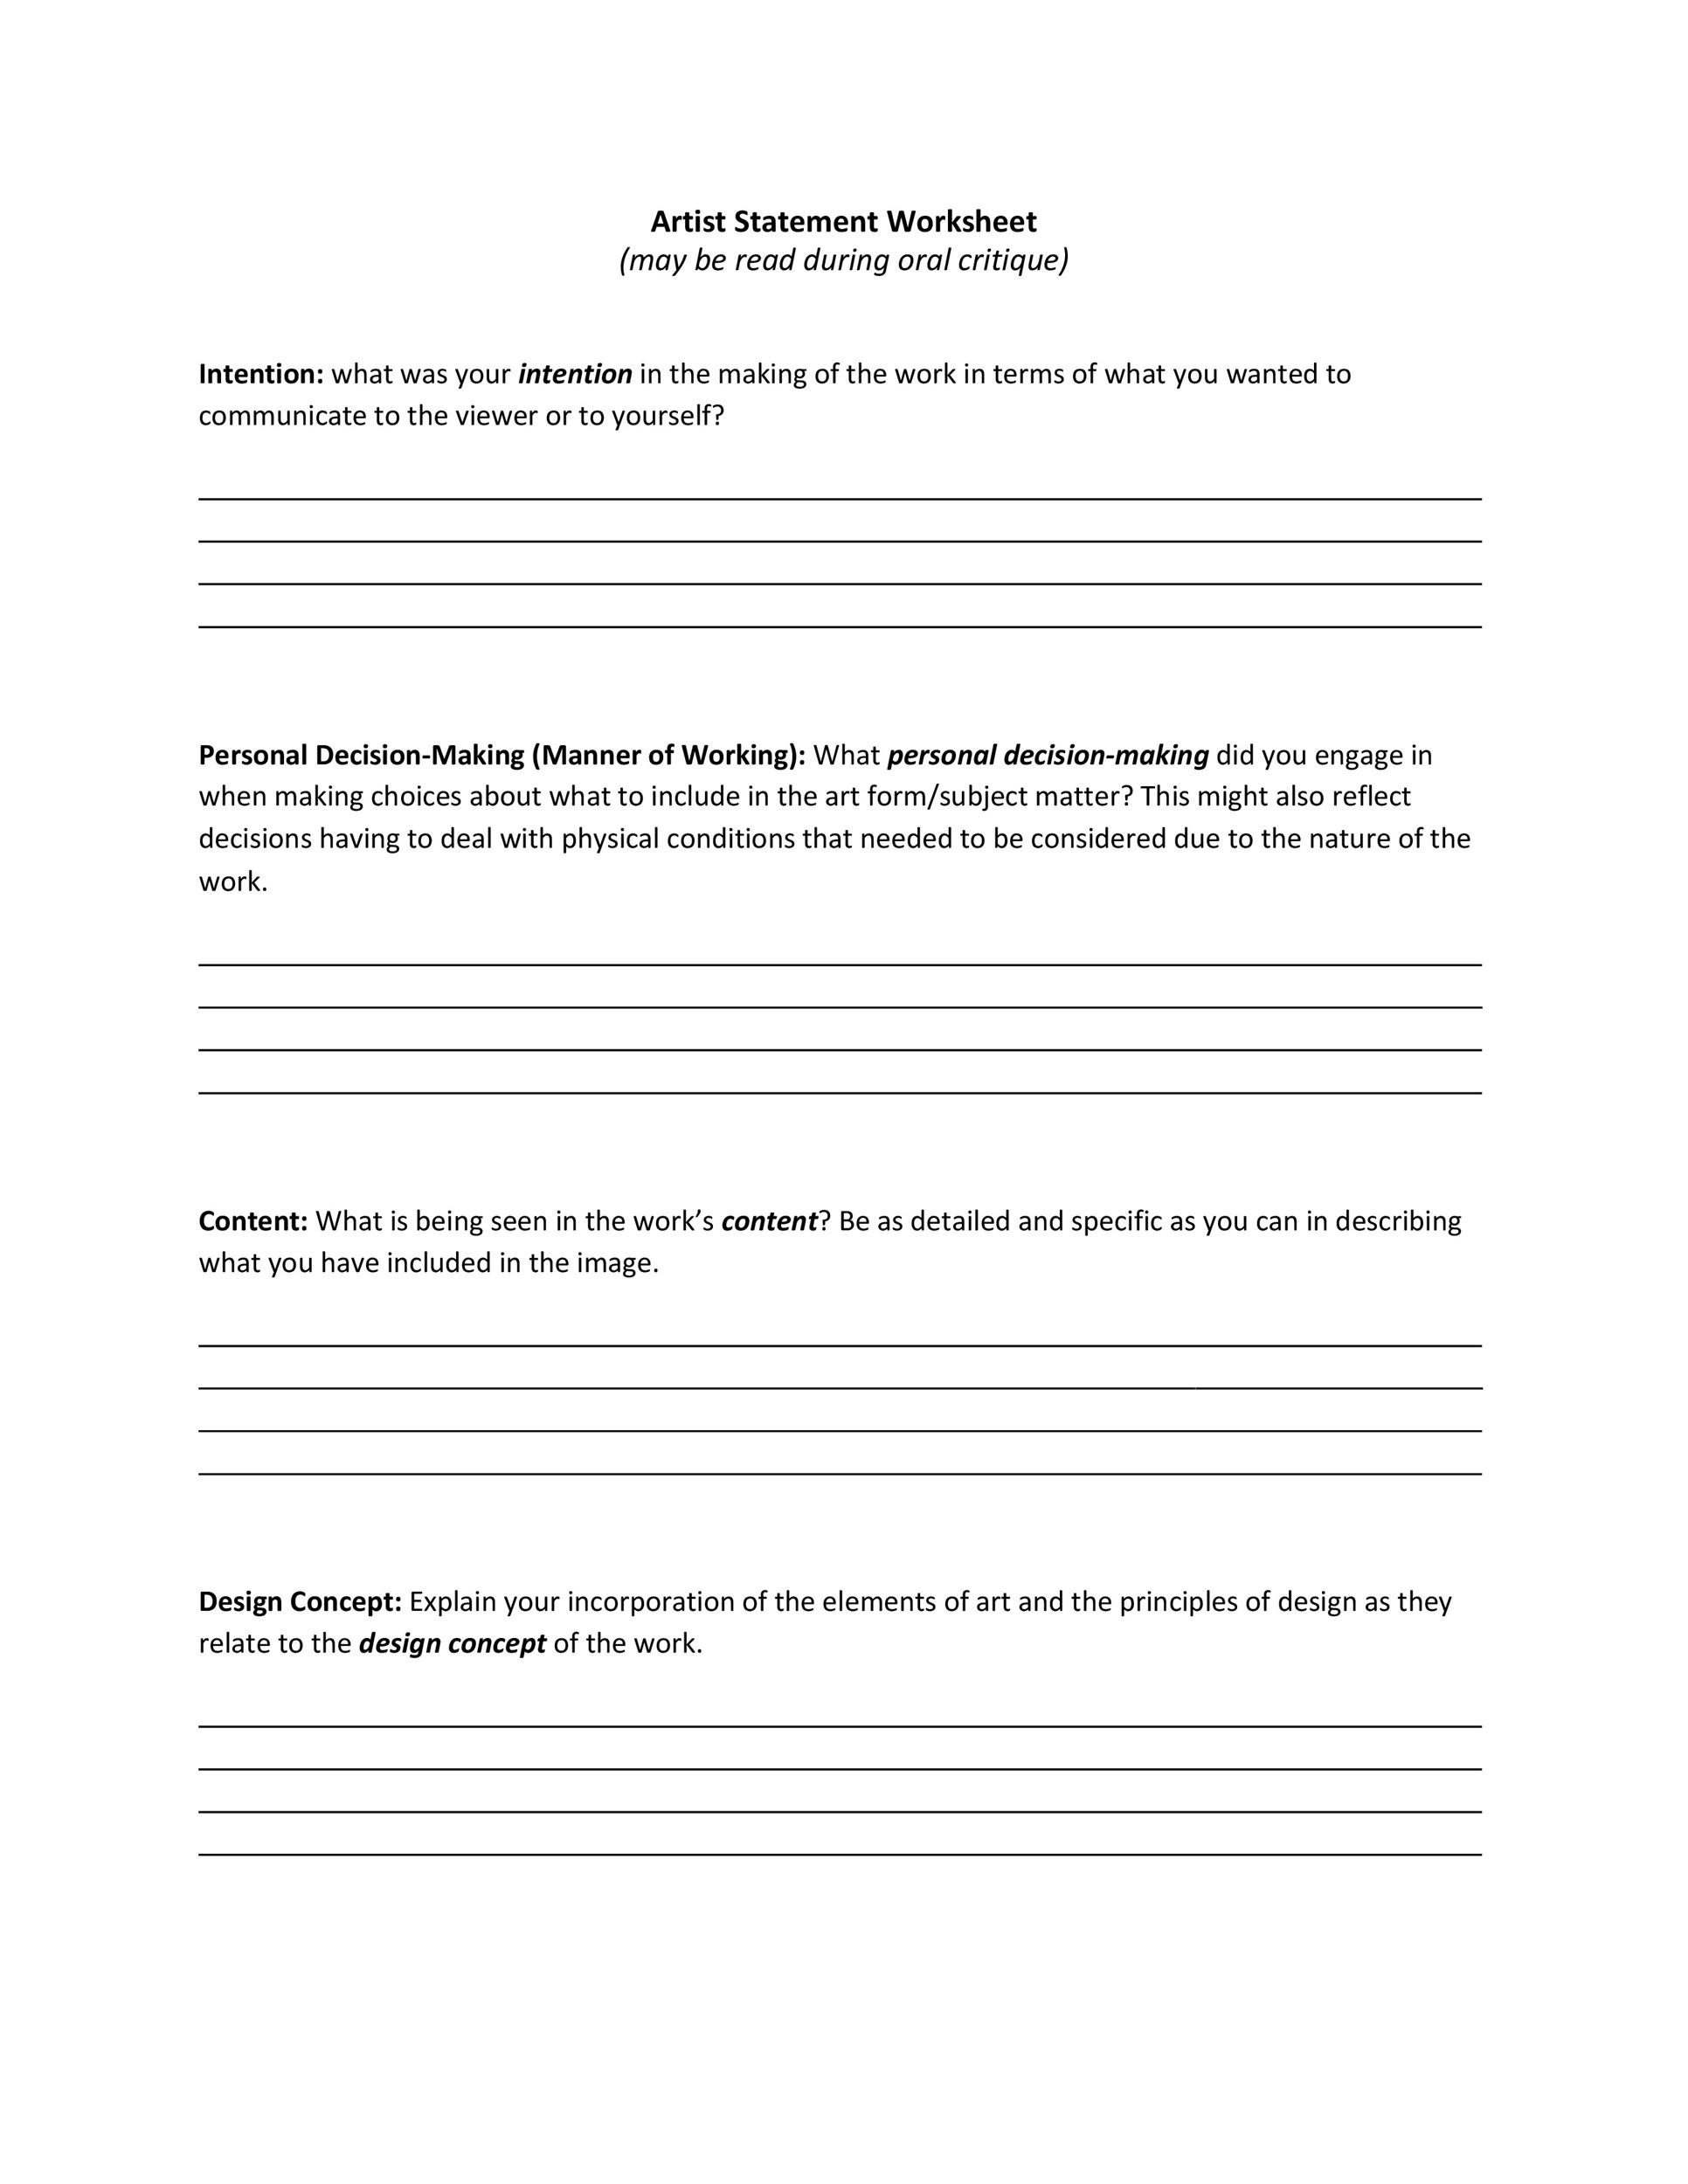 personal statements examples for art